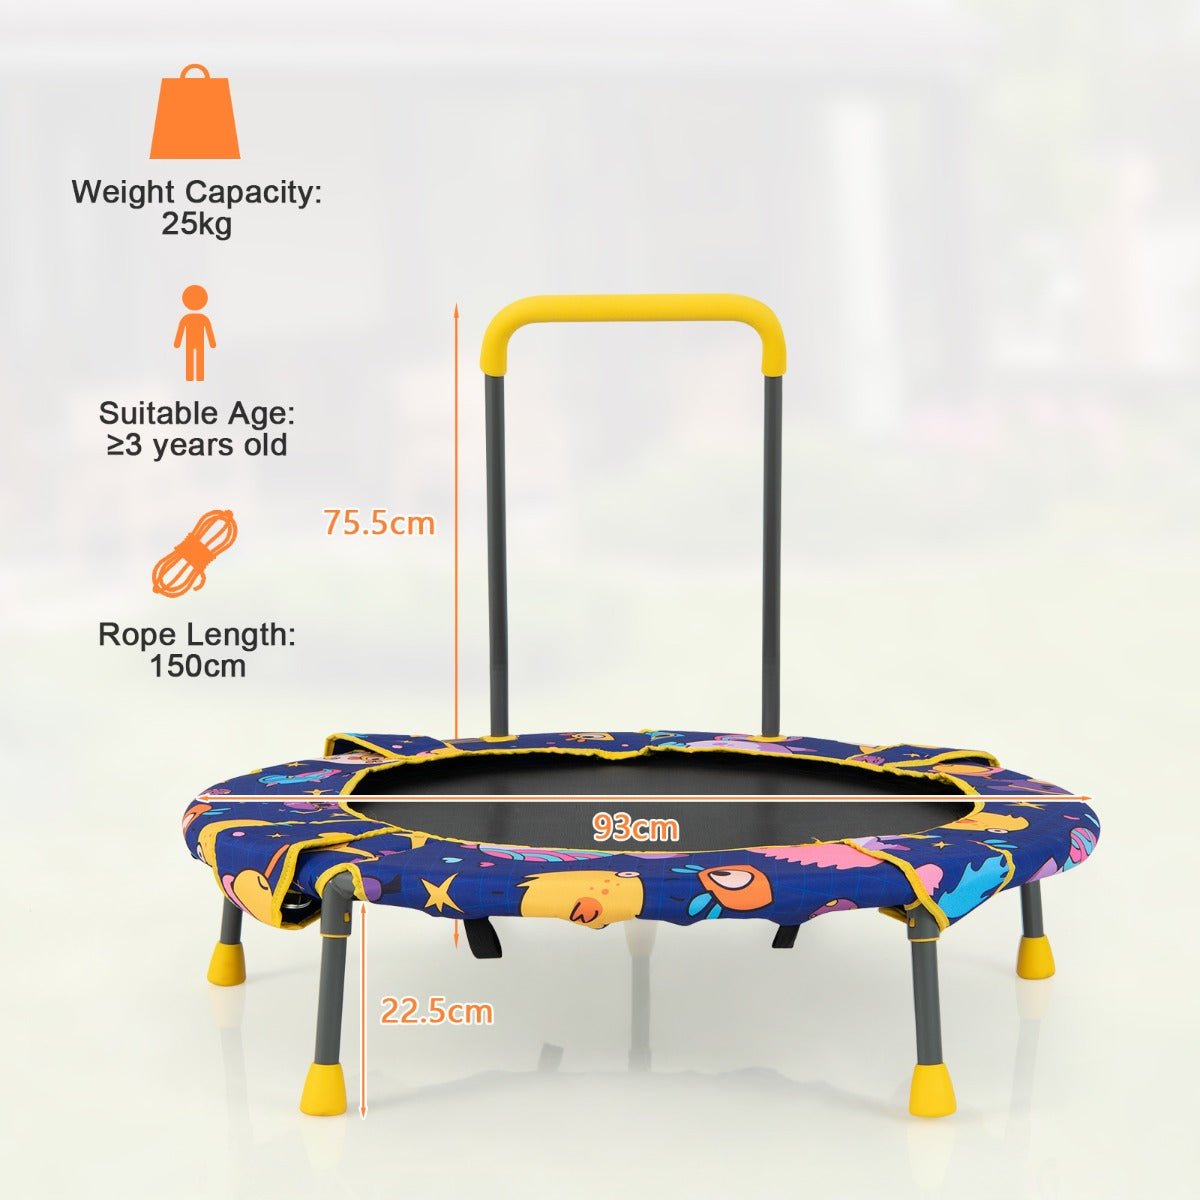 Swing and Bounce Thrills: Convertible Swing and Trampoline Set with Upholstered Handrail for Kids